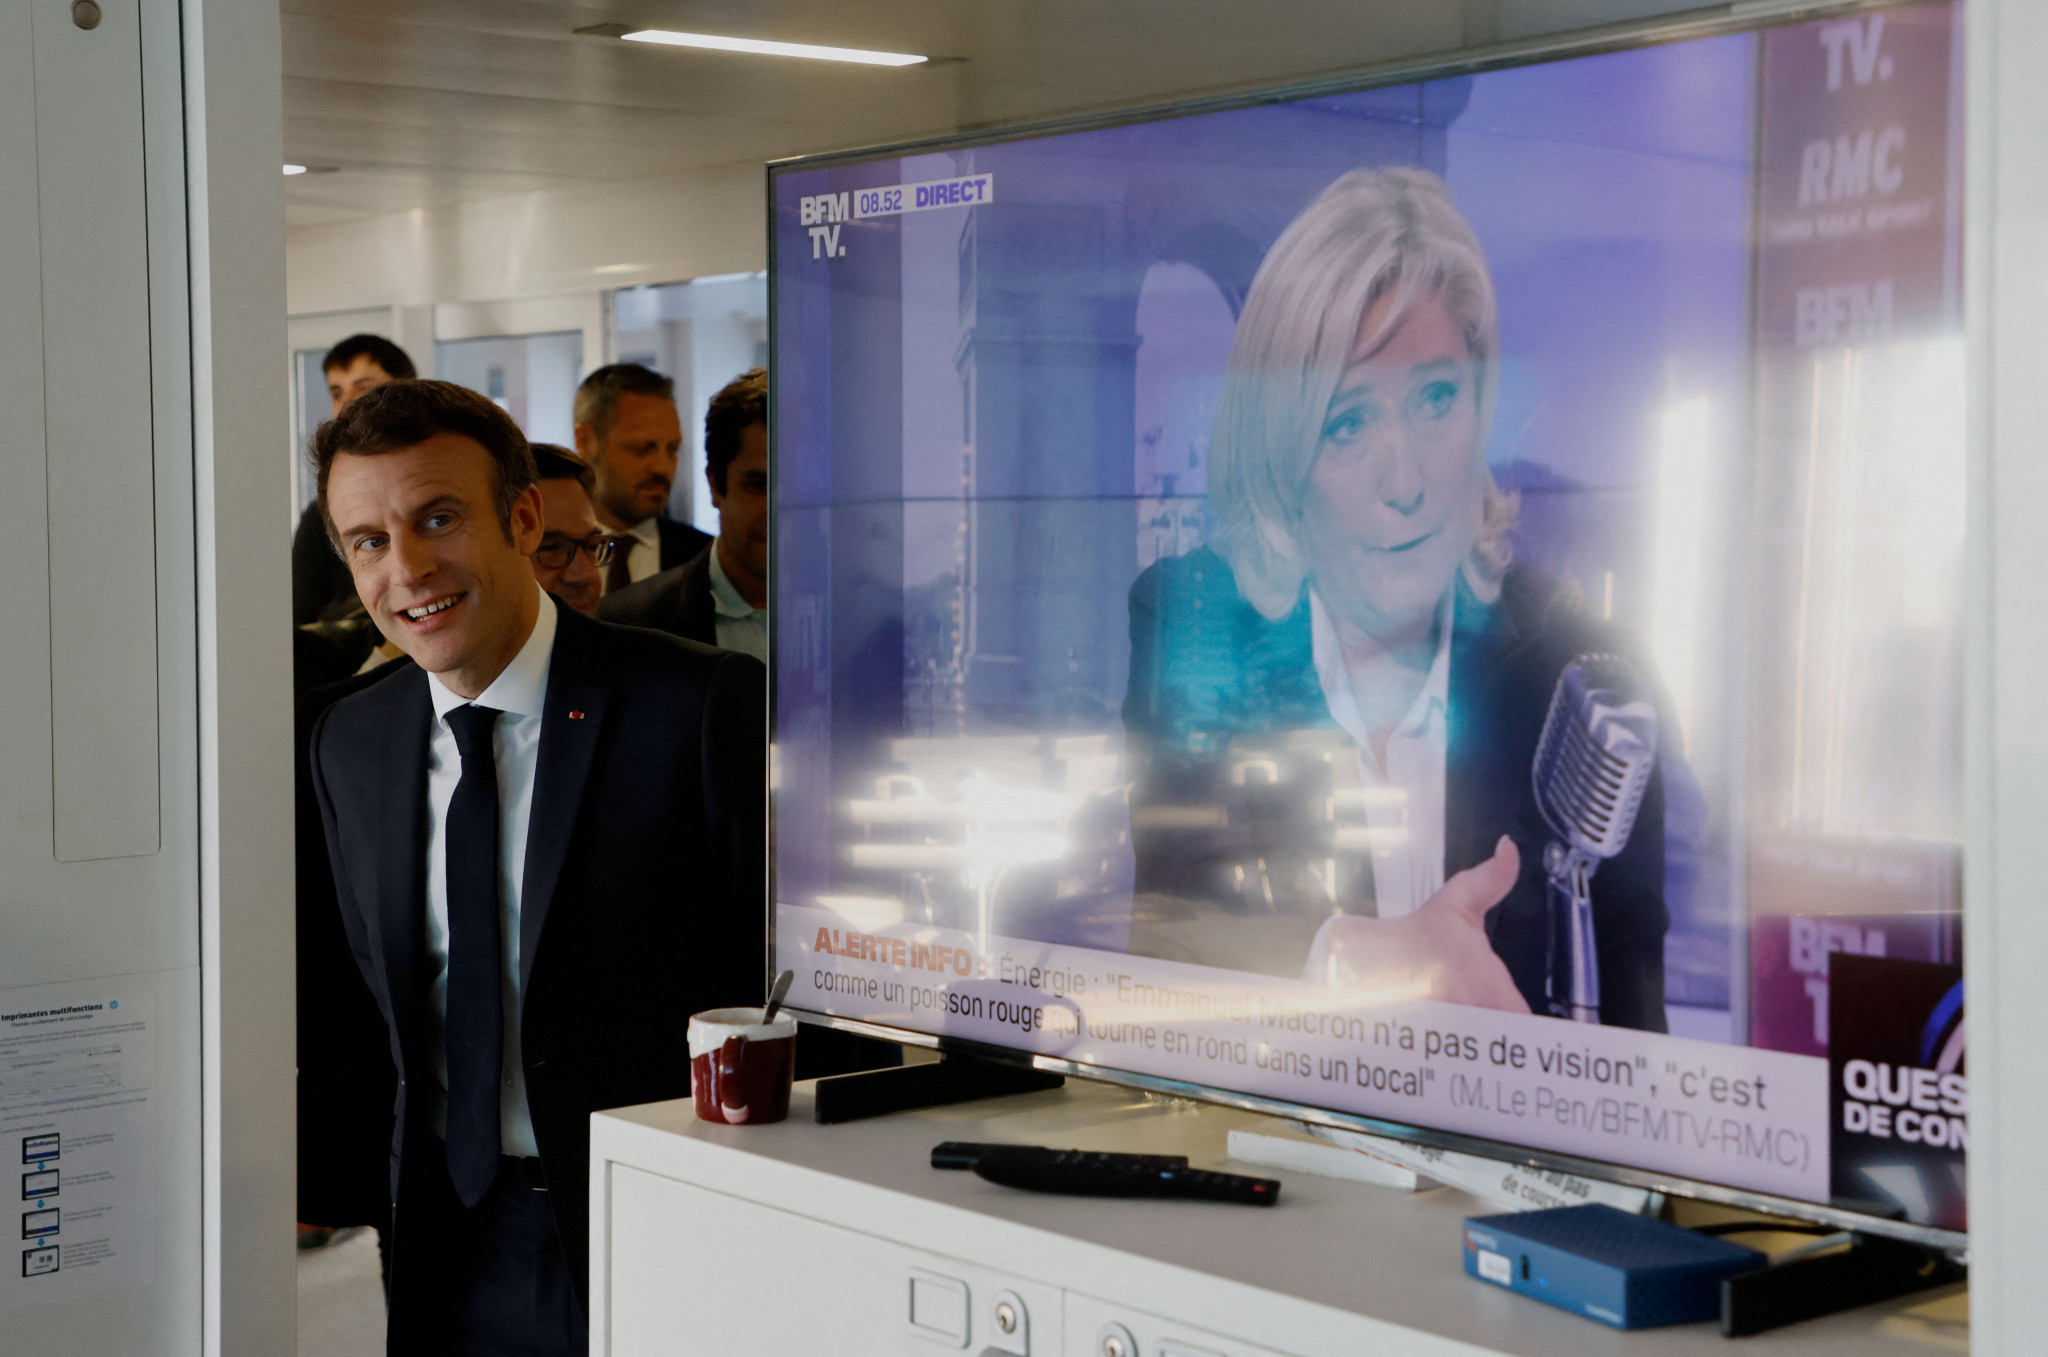 Macron and Le Pen set for Presidential run-off as Paris Mayor Hidalgo gets less than two per cent of votes